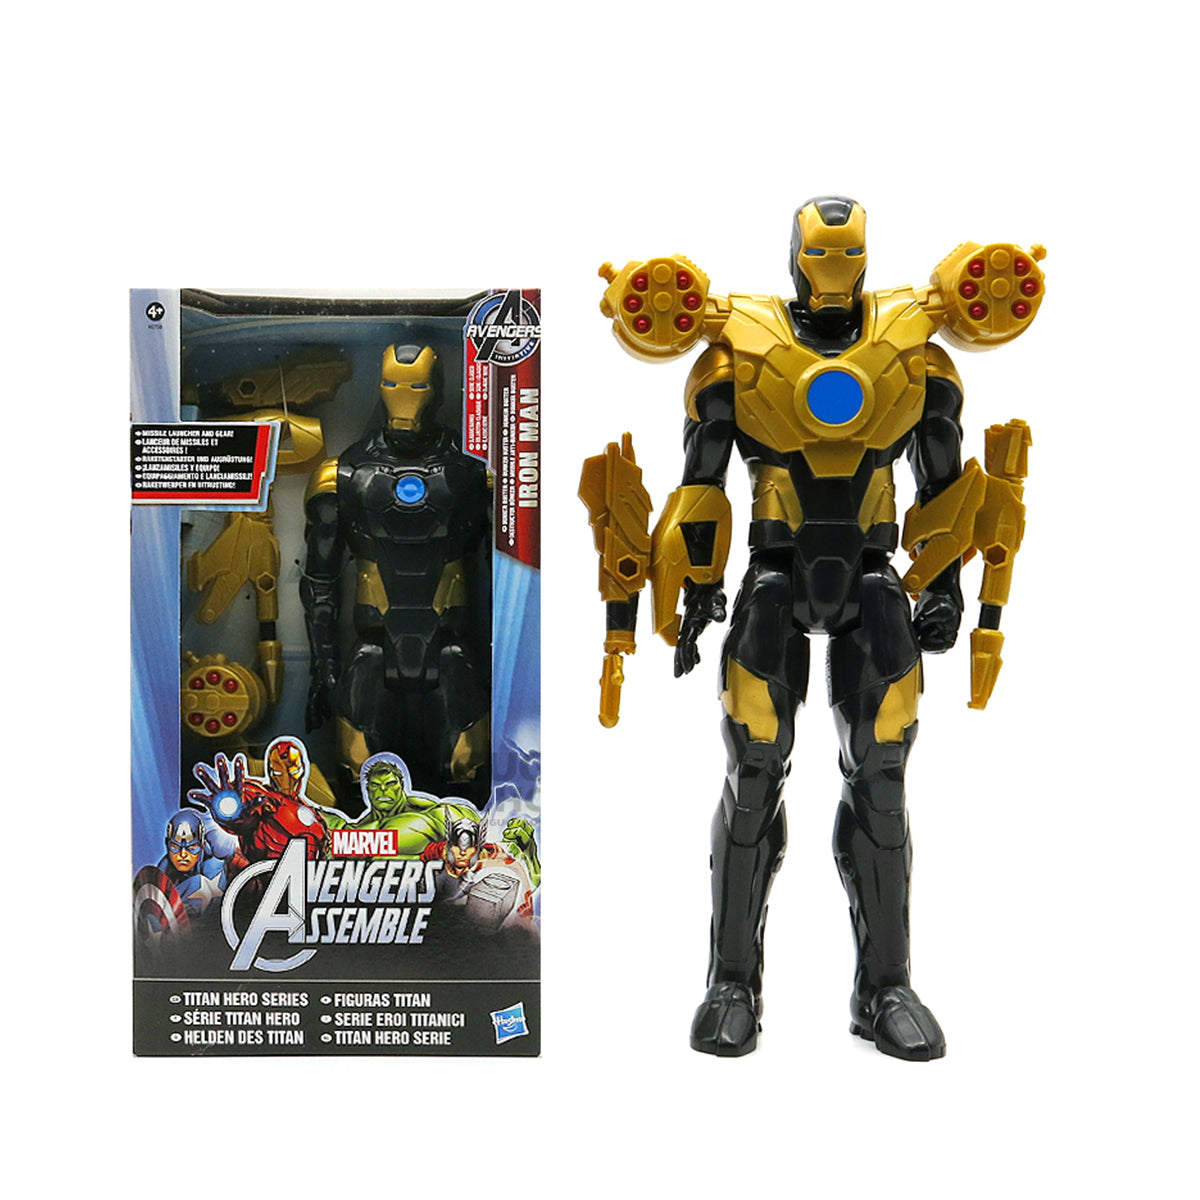 Marvel Avengers Action Figure 30 cm (Styles Vary - One Supplied)